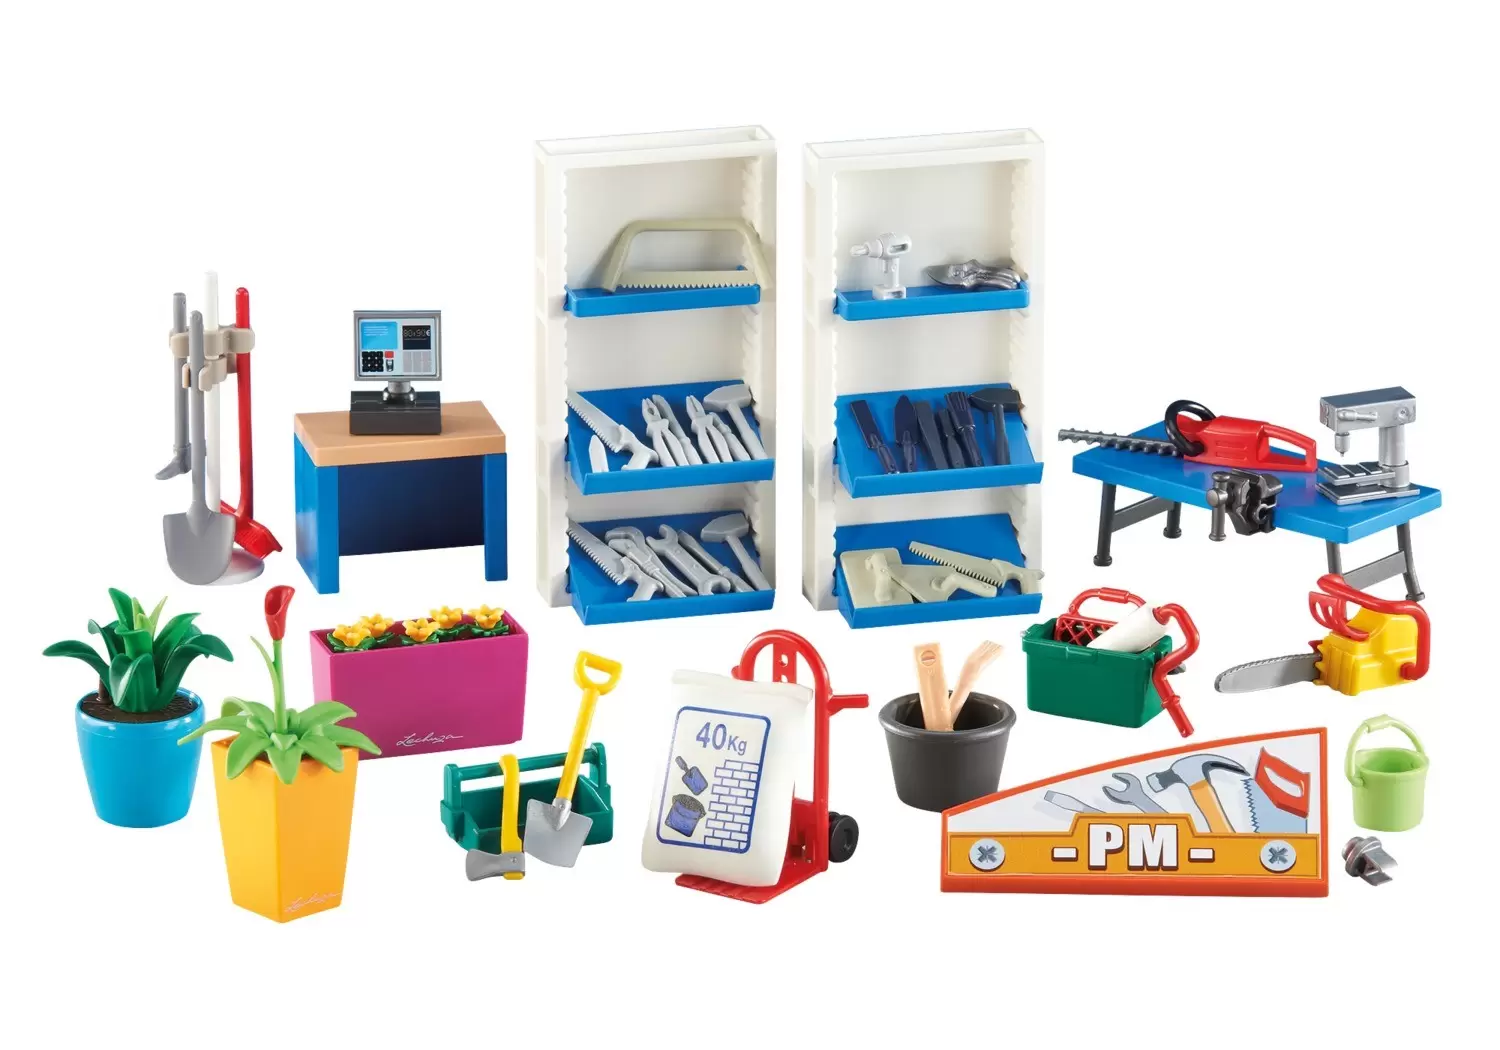 Playmobil Houses and Furniture - Hardware Store Furnishings